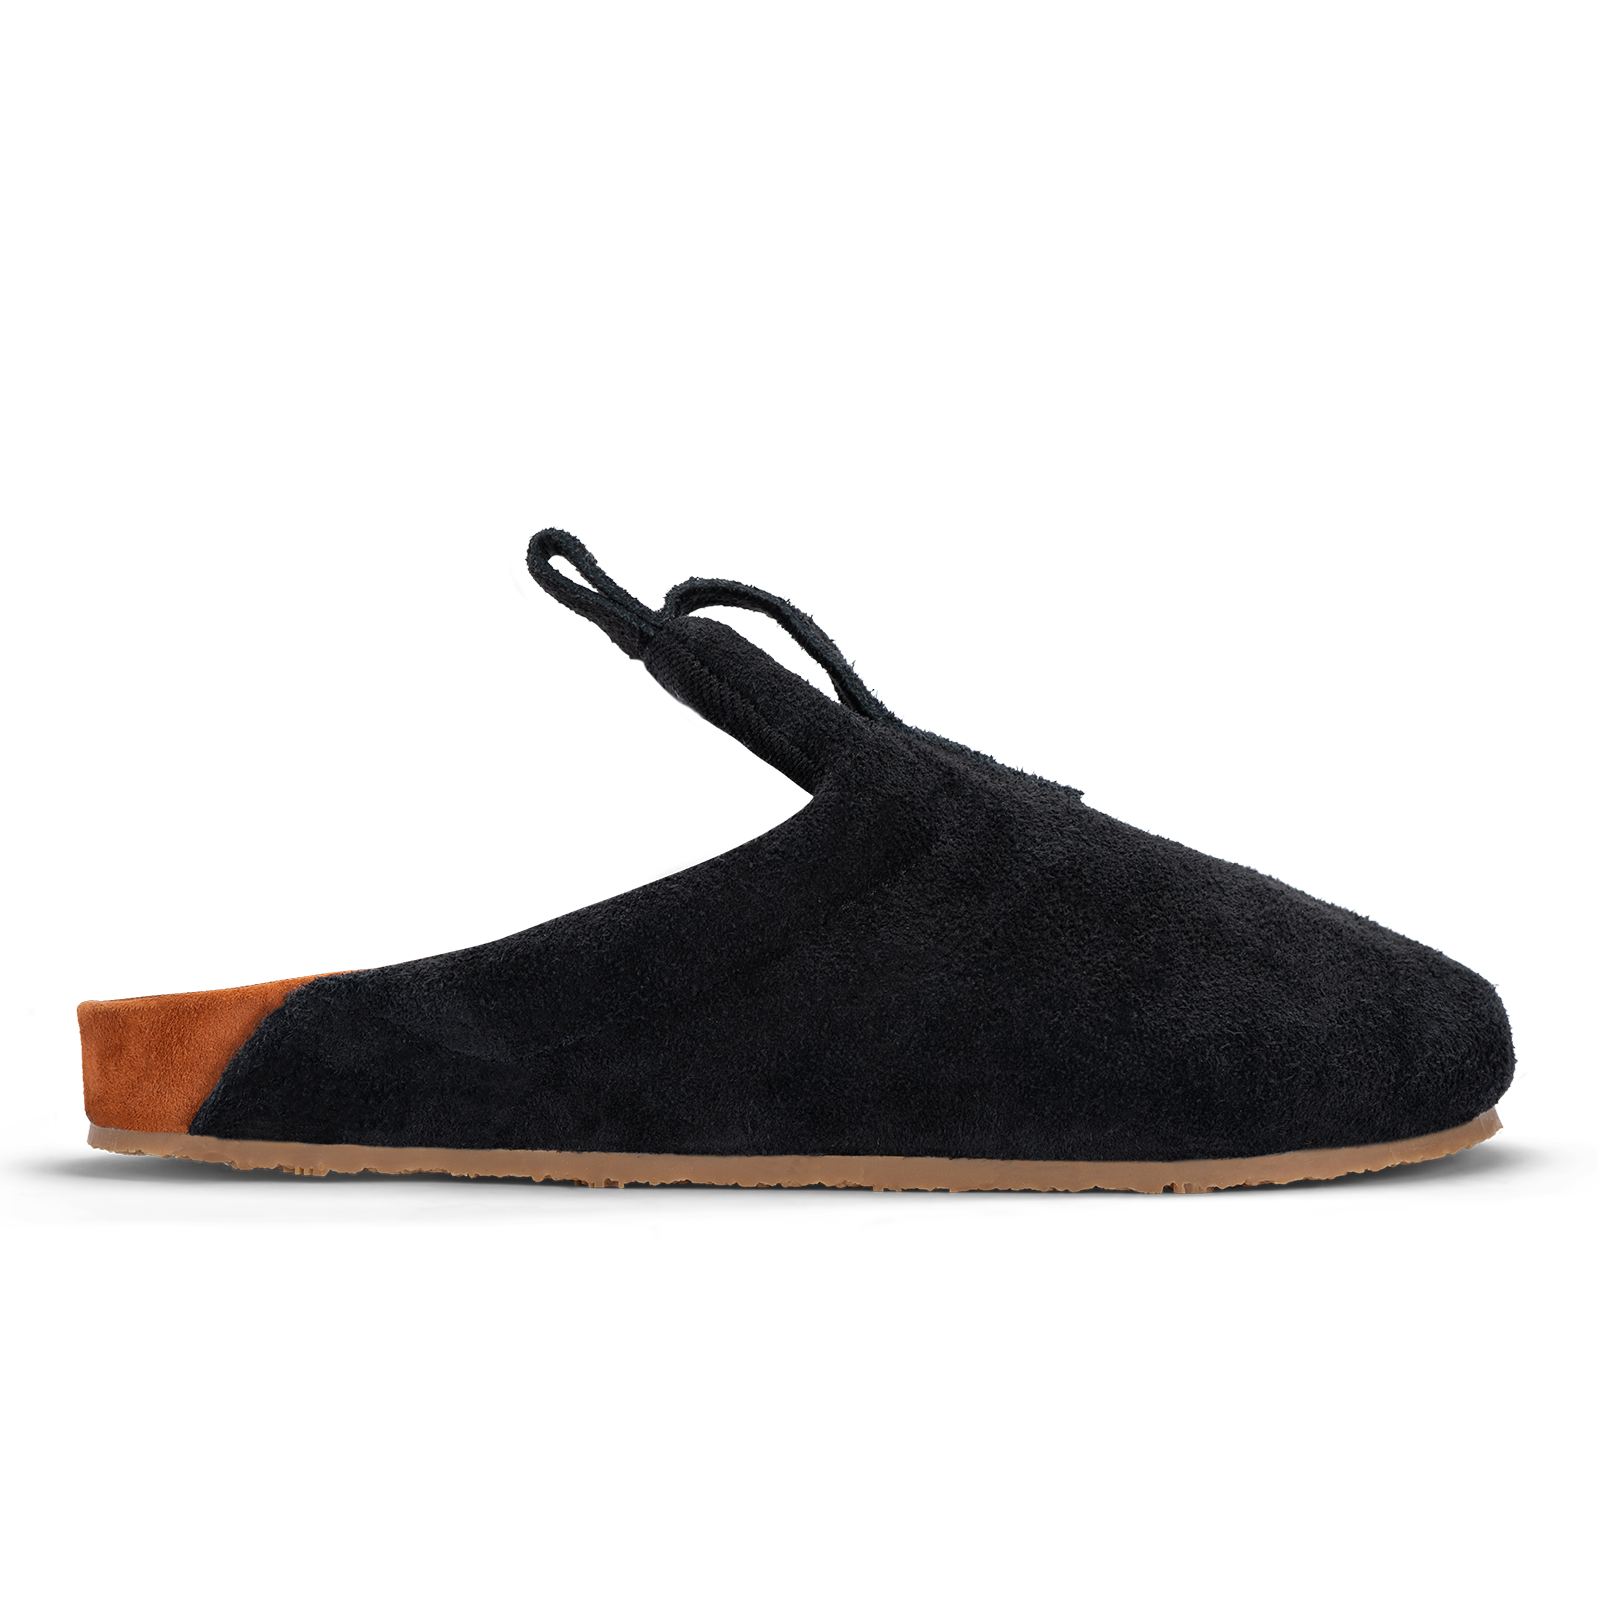 profile view Bantha Black suede upper, cork midsole wrapped in soft suede, Vibram sheet gum rubber outsole